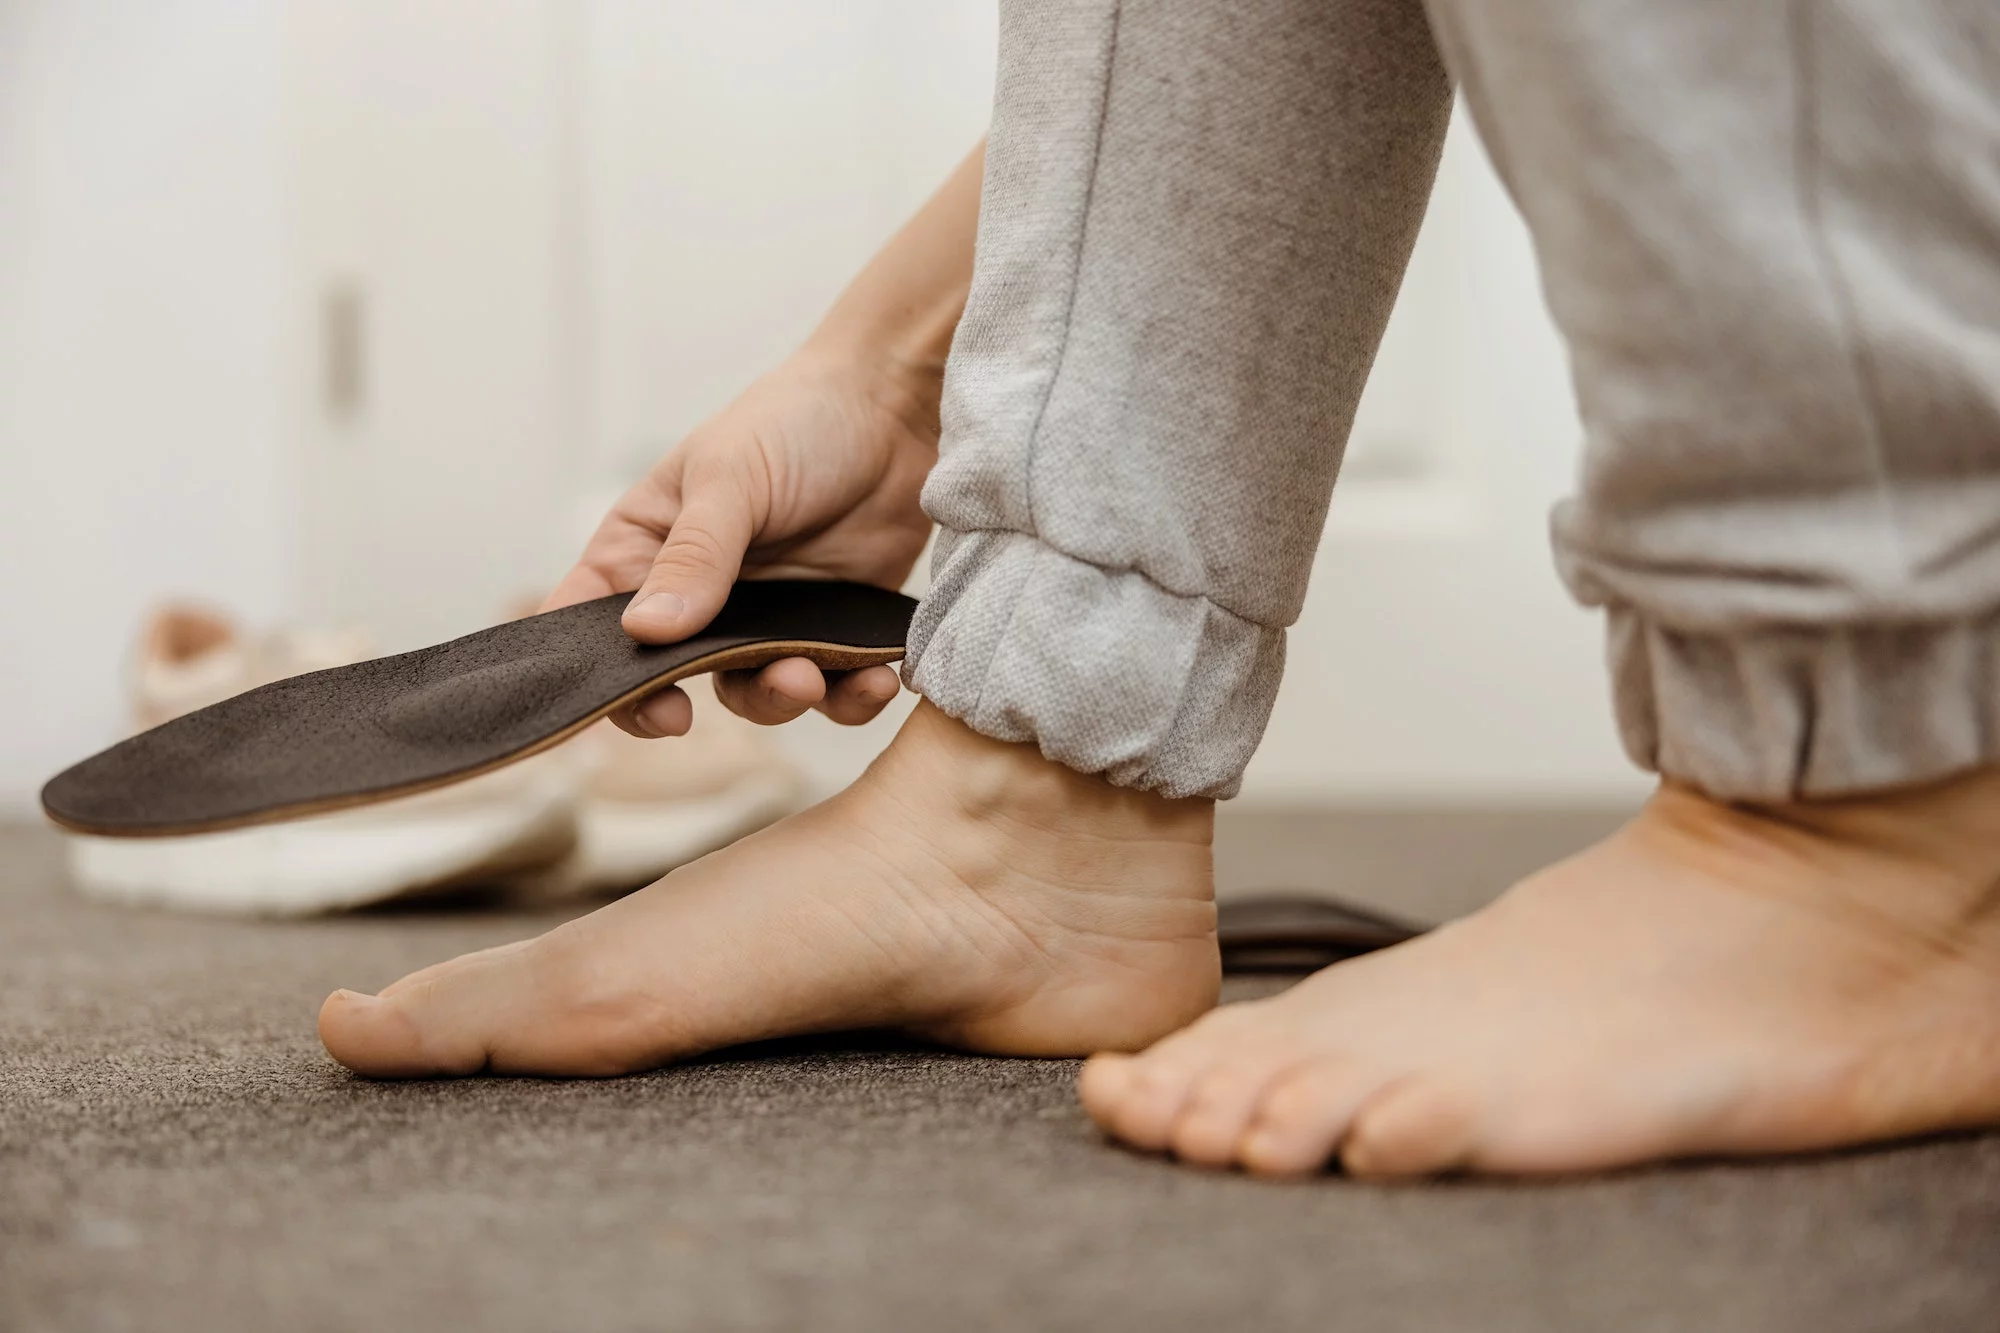 Treating Common Foot Problems with the Right Orthotics